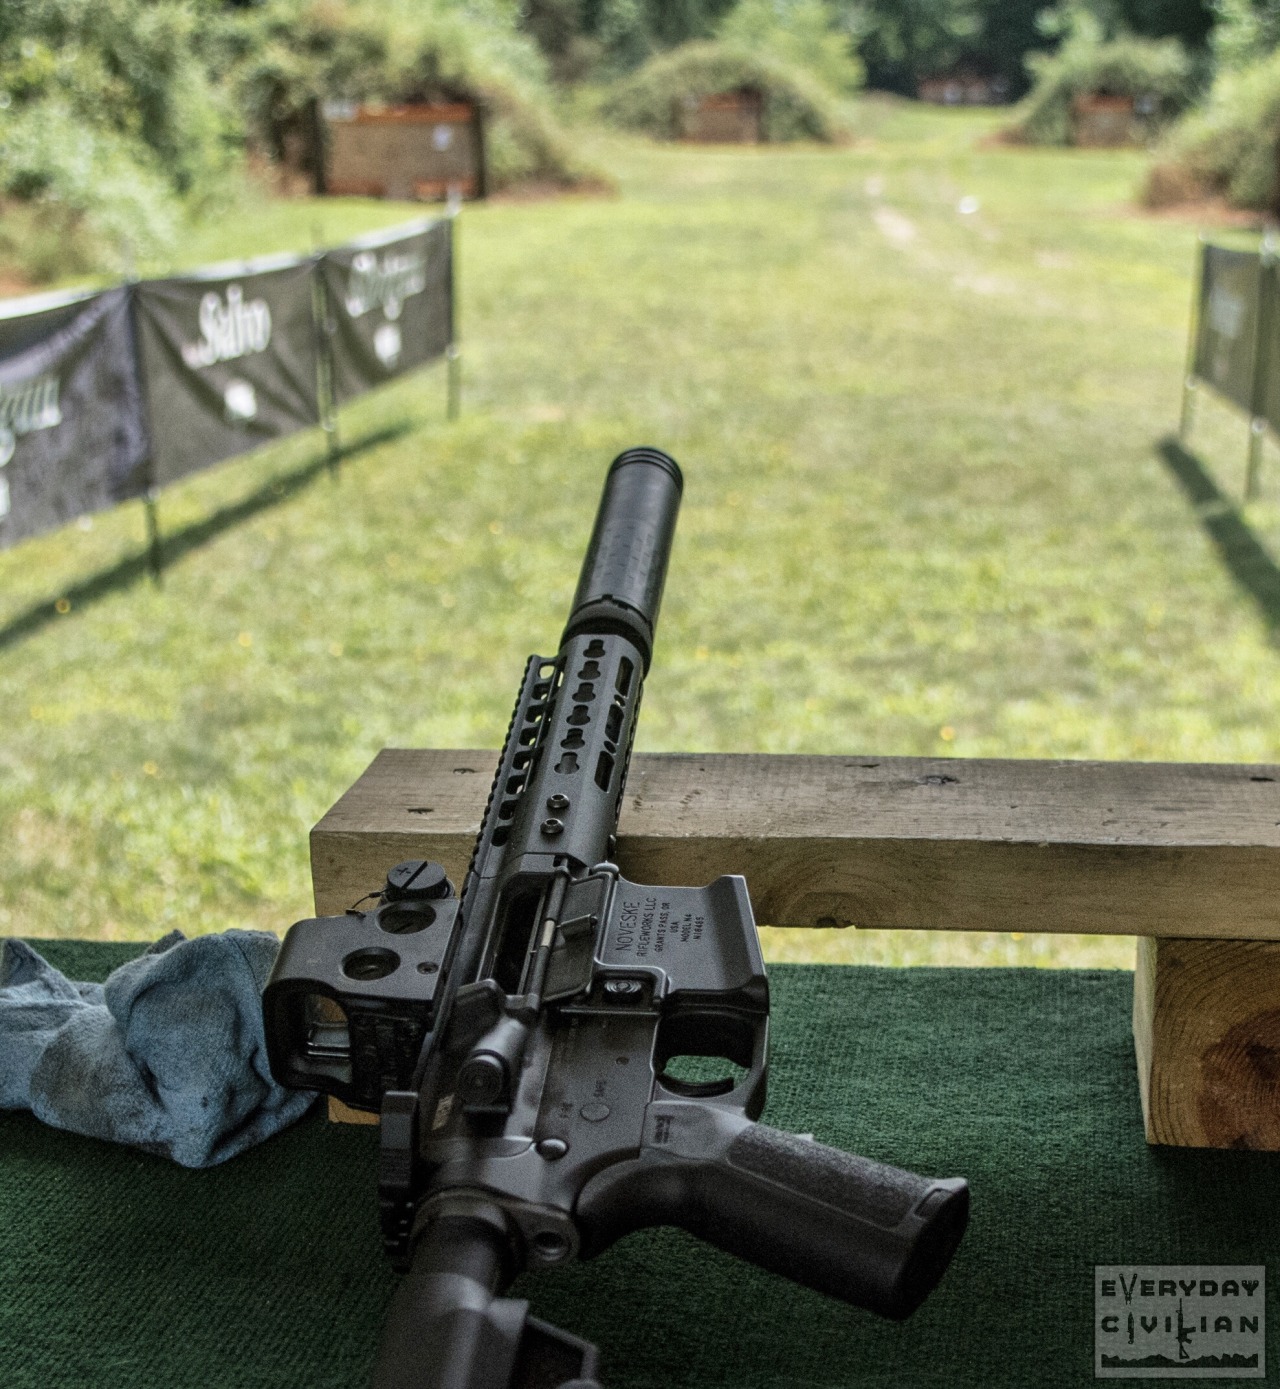 everydaycivilian:  Quiet Riot with @silencerco and their Saker 7.62 with muzzle brake,